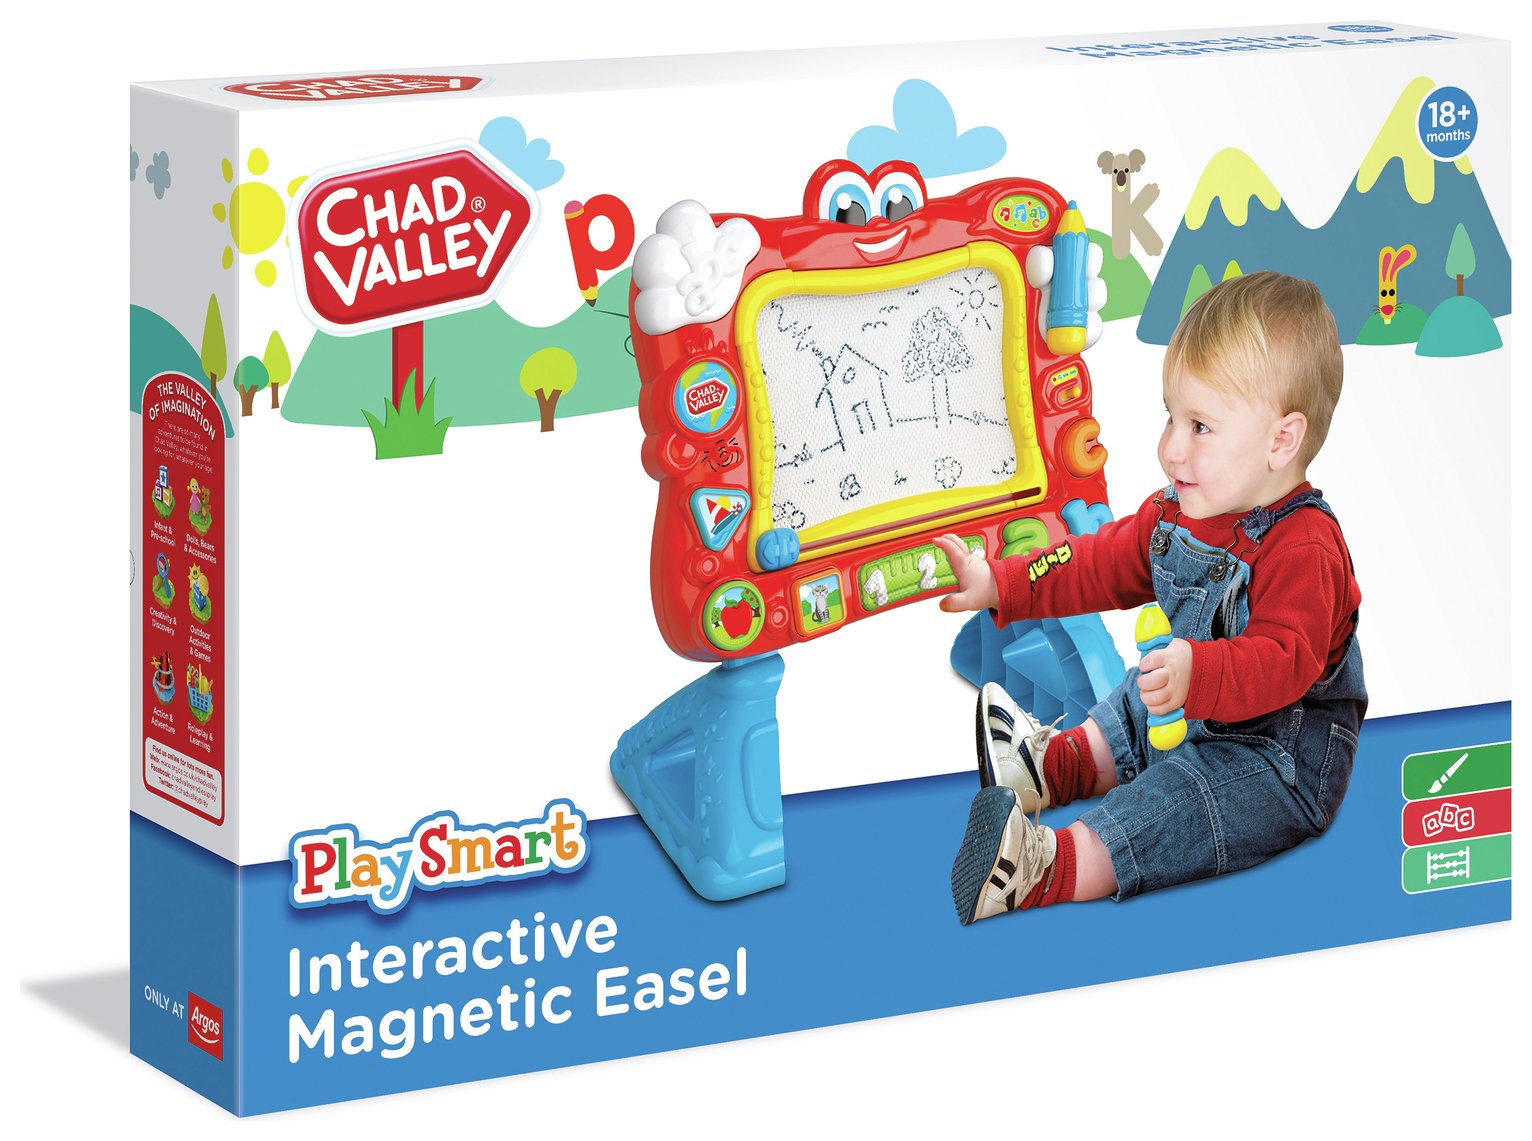 Chad Valley PlaySmart Interactive Magnetic Easel